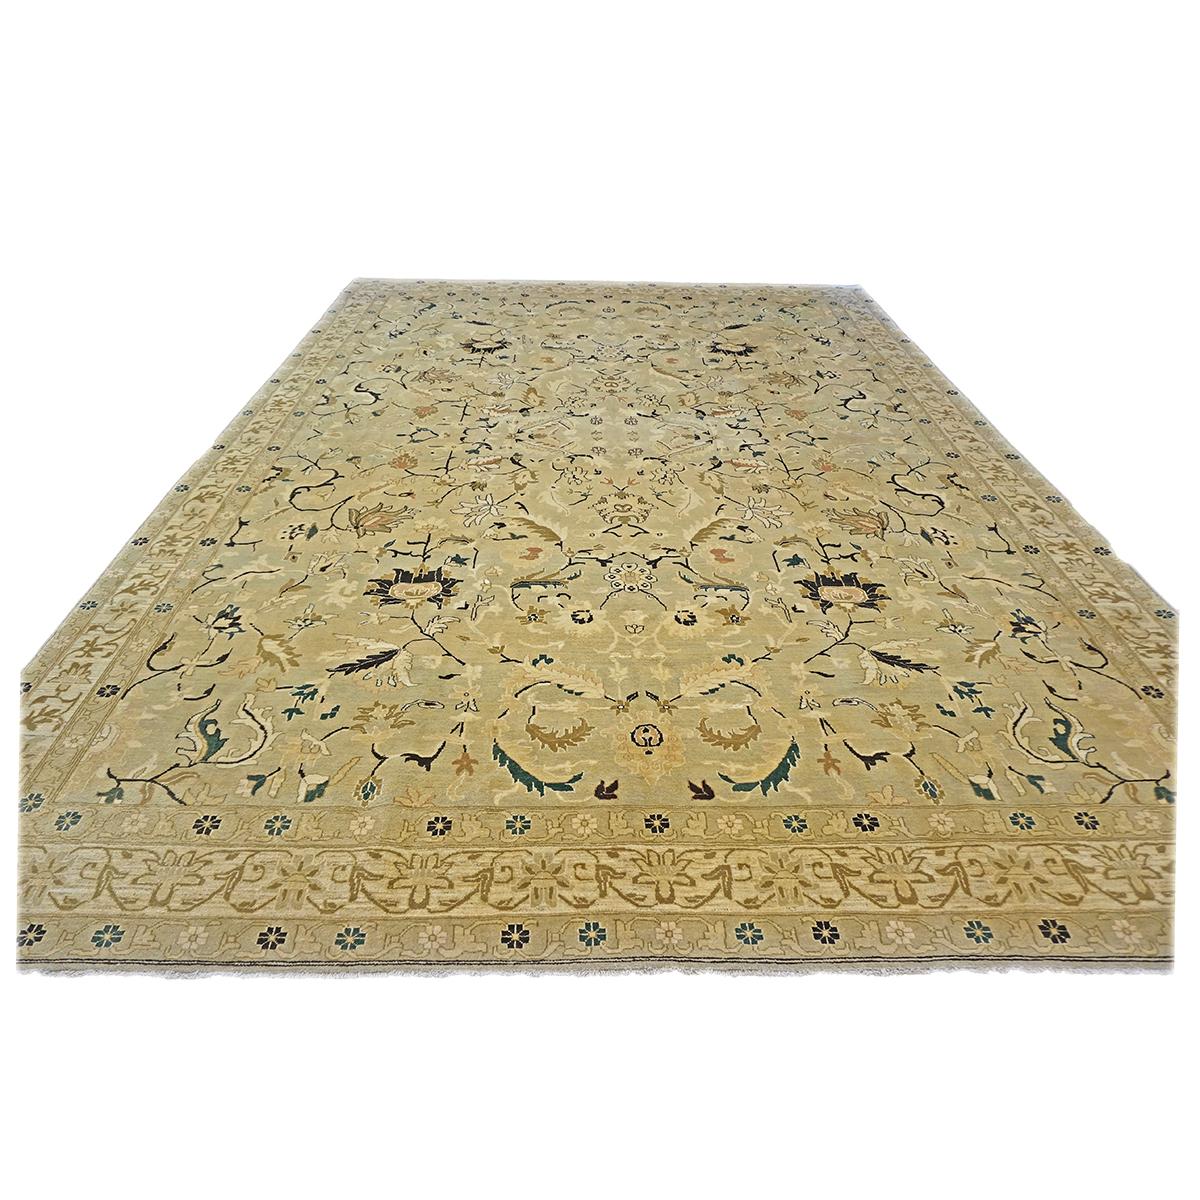 Ashly Fine Rugs presents a 21st-century Turkish Agra 9x12 Light Olive Handmade Area Rug was made with 100% hand-twisted and vegetable-dyed wool fibers. The background is a very light olive and khaki color, with the design and details consisting of a